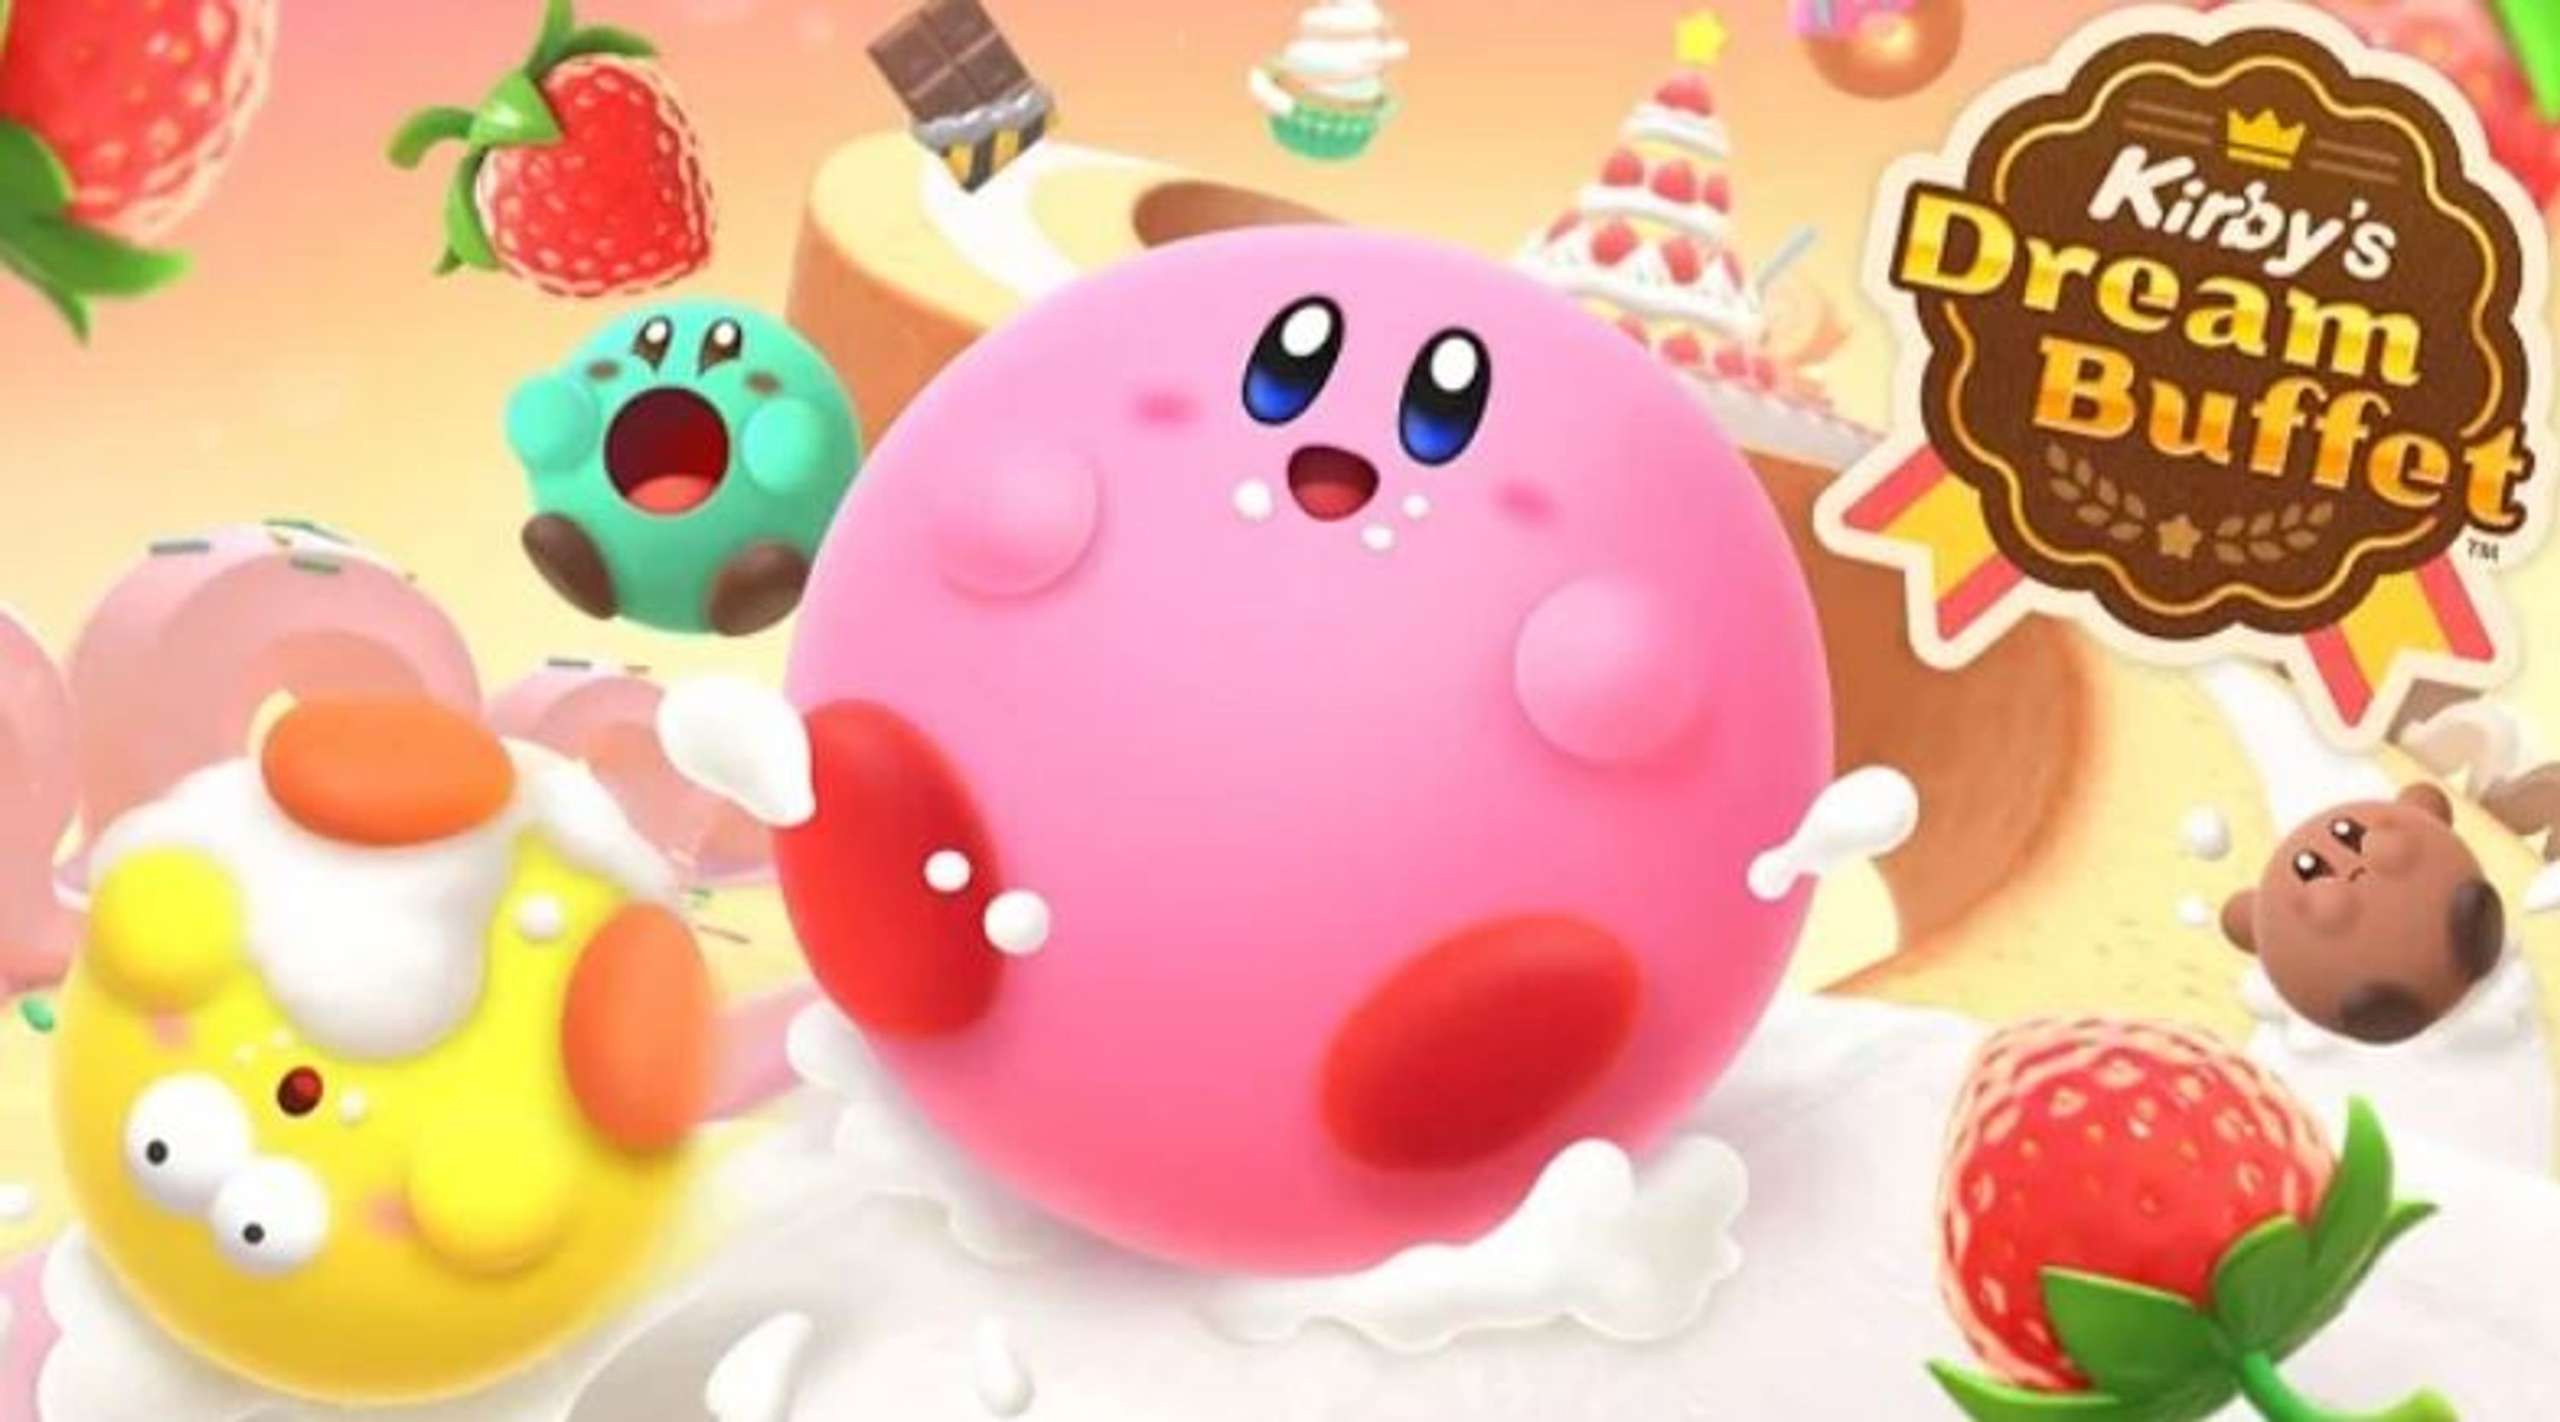 The Most Recent Gameplay Clip For Kirby’s Dream Buffet On The Nintendo Switch Has Made It Clear That The Game’s Release Date Is August 17